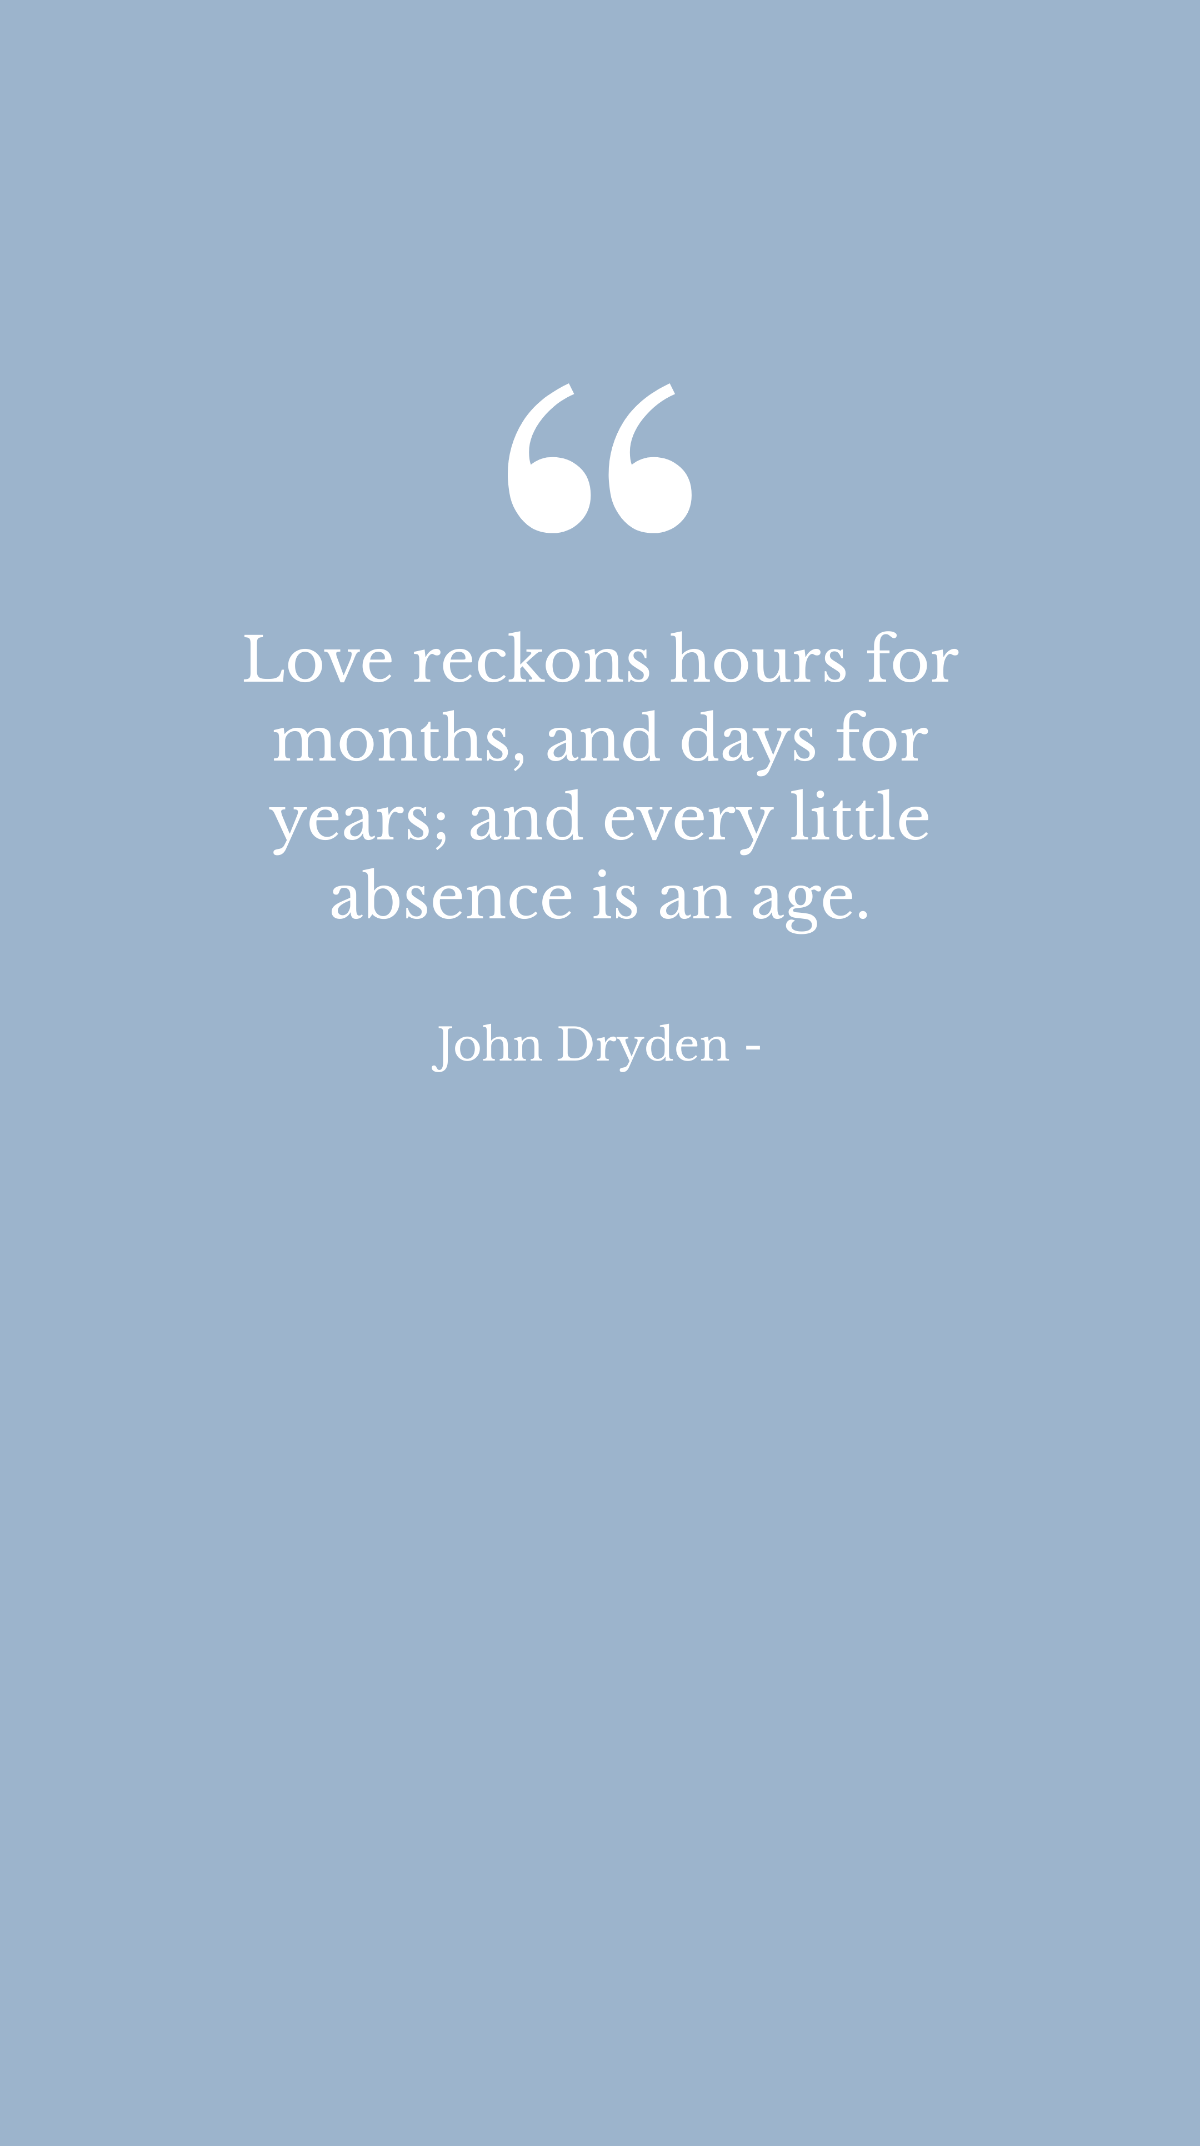 Free John Dryden - Love reckons hours for months, and days for years; and every little absence is an age. Template